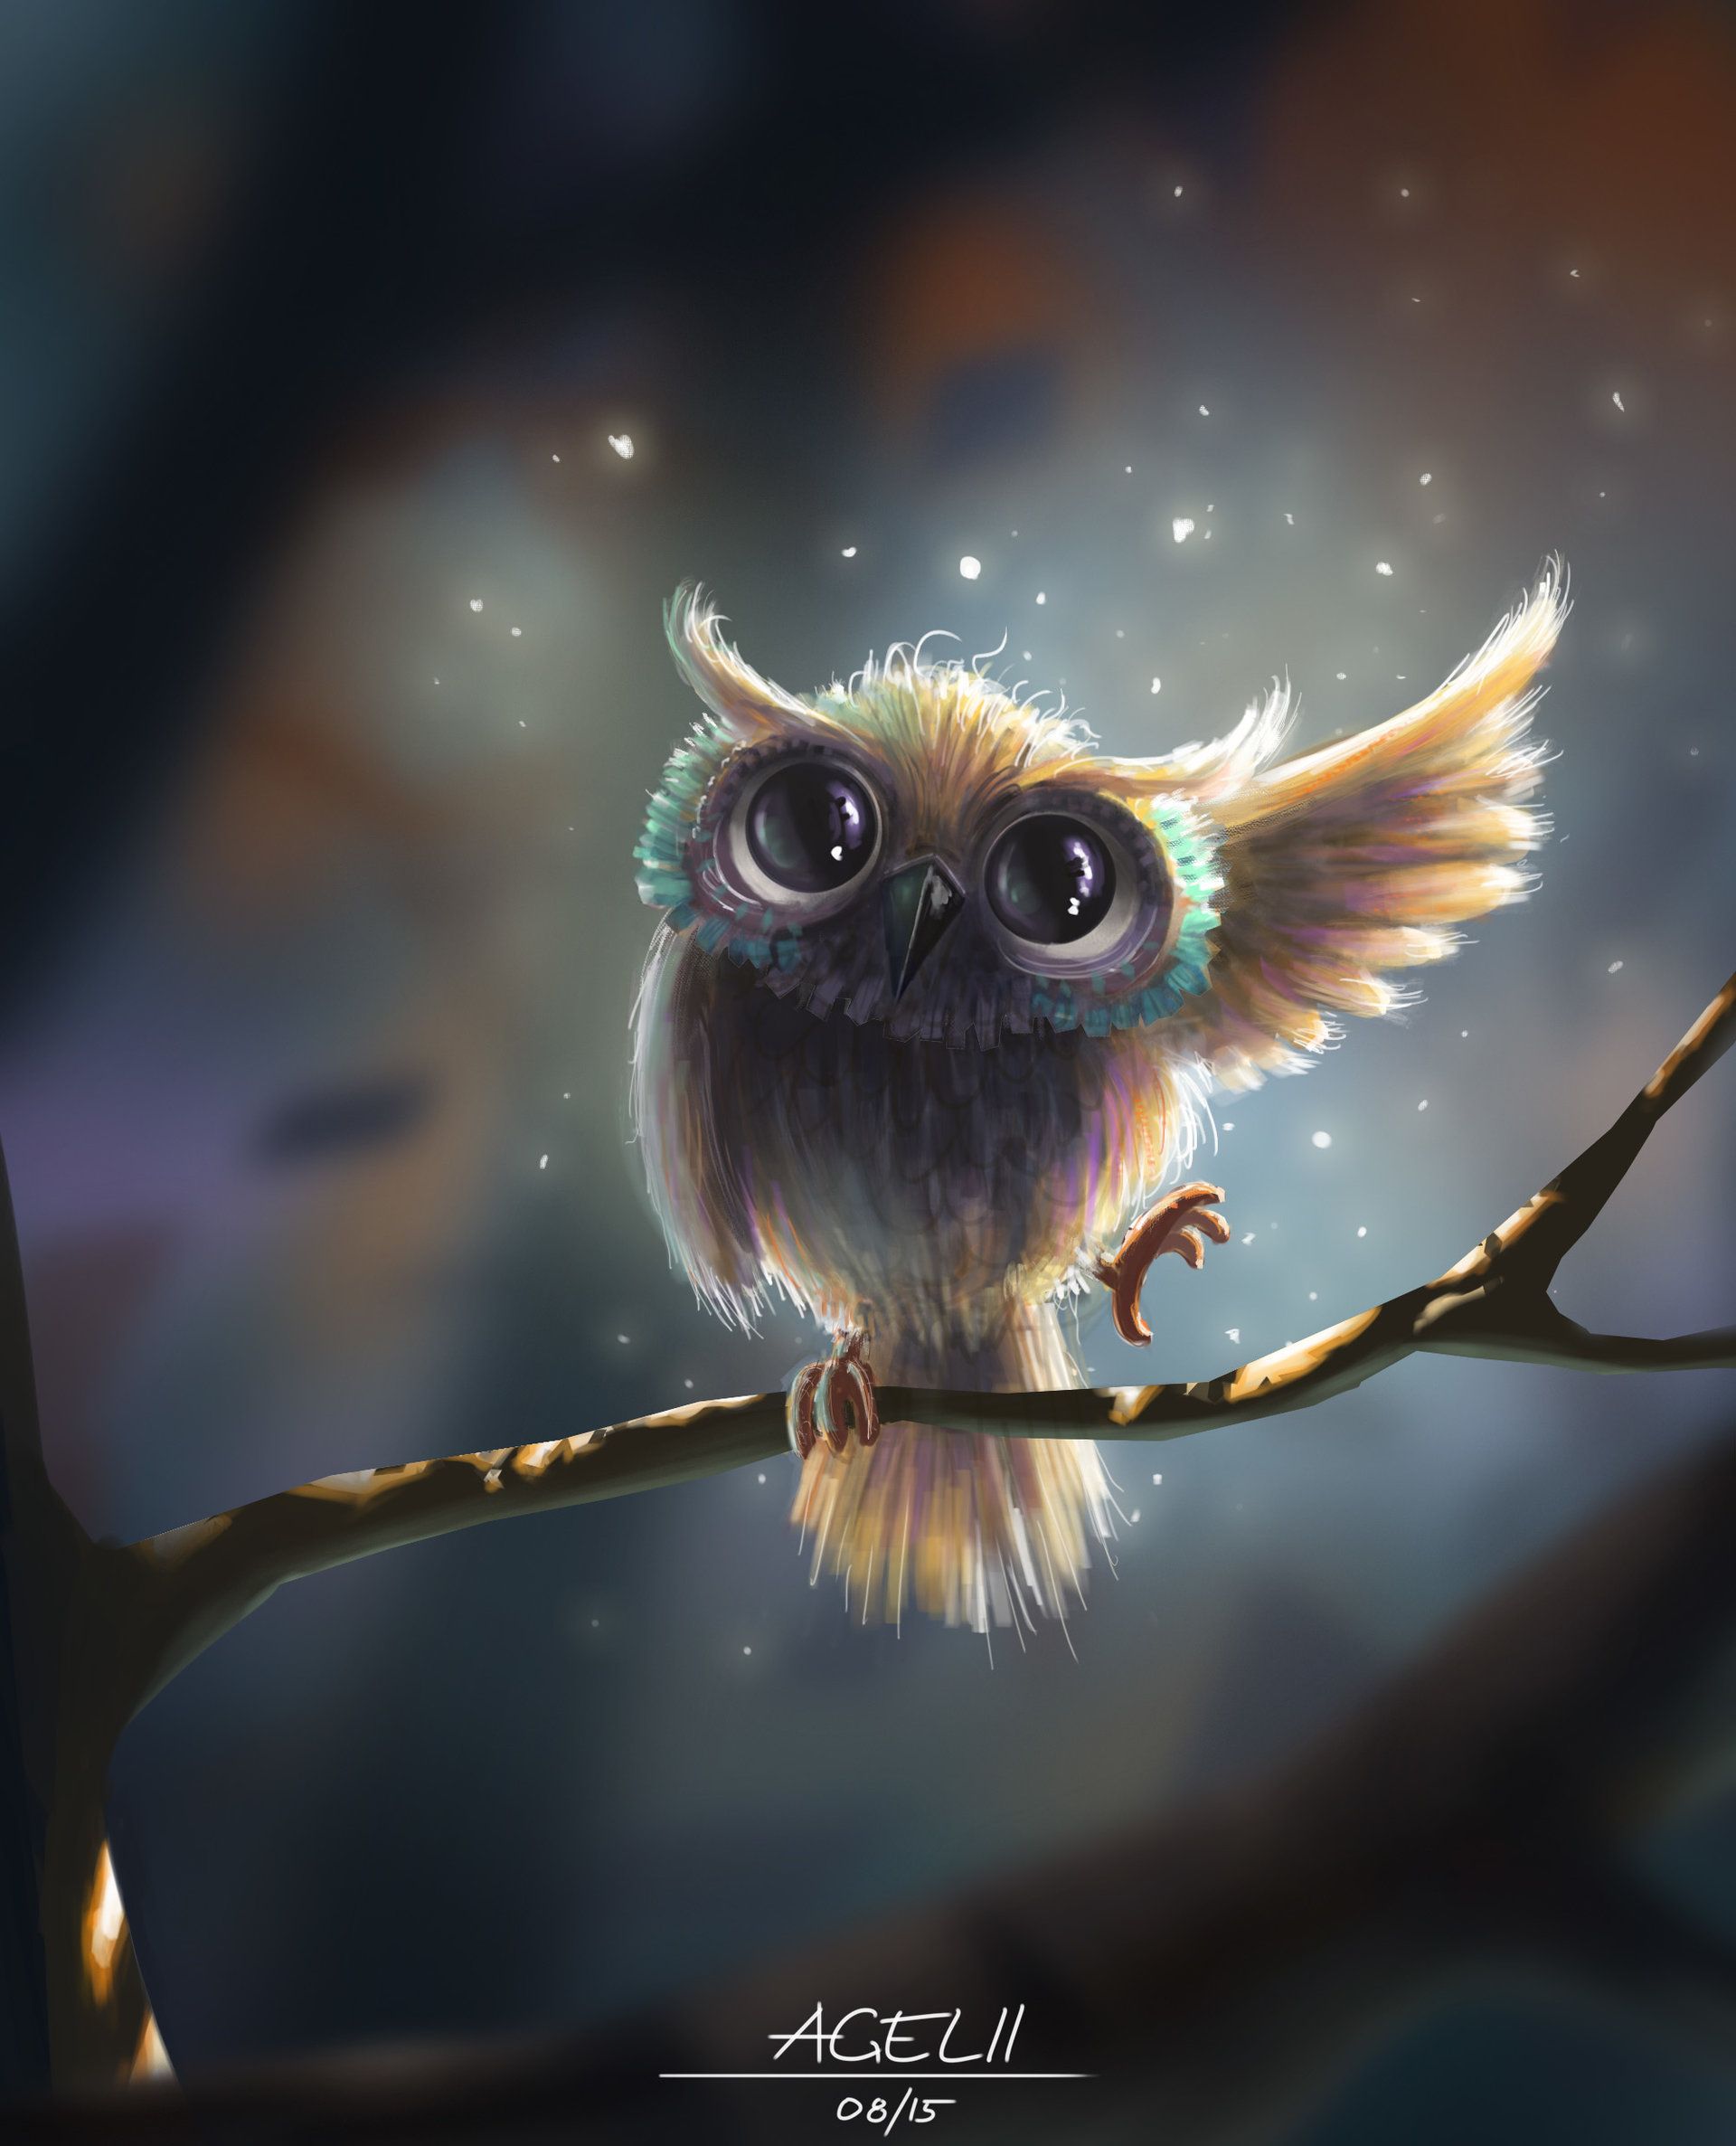 Cute Baby Owl Wallpapers